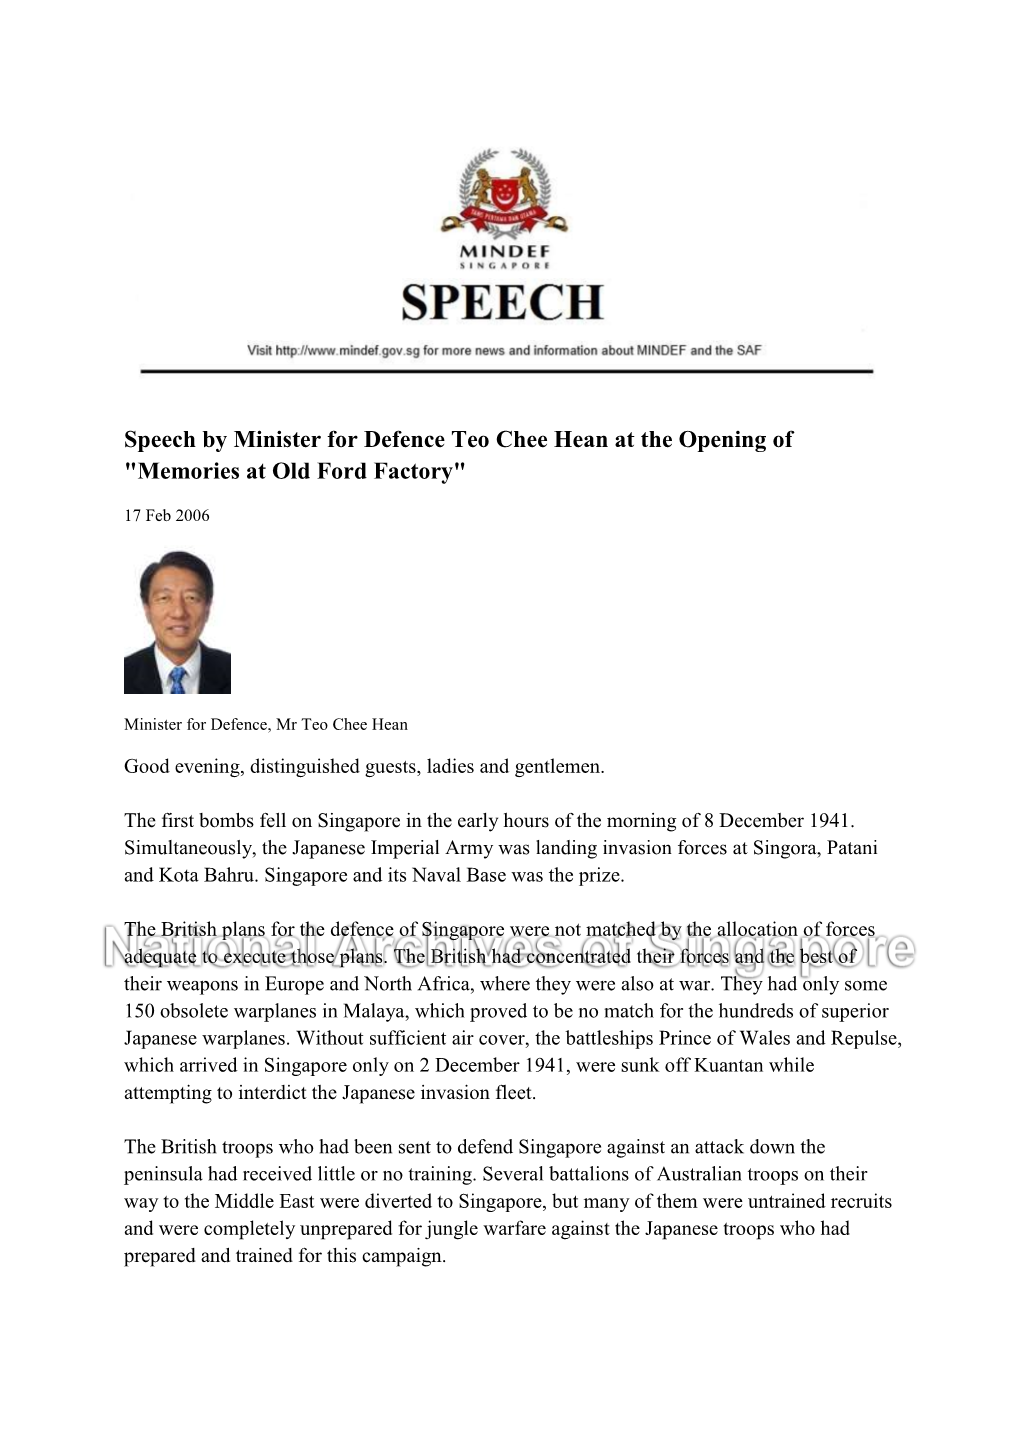 Speech by Minister for Defence Teo Chee Hean at the Opening of "Memories at Old Ford Factory"